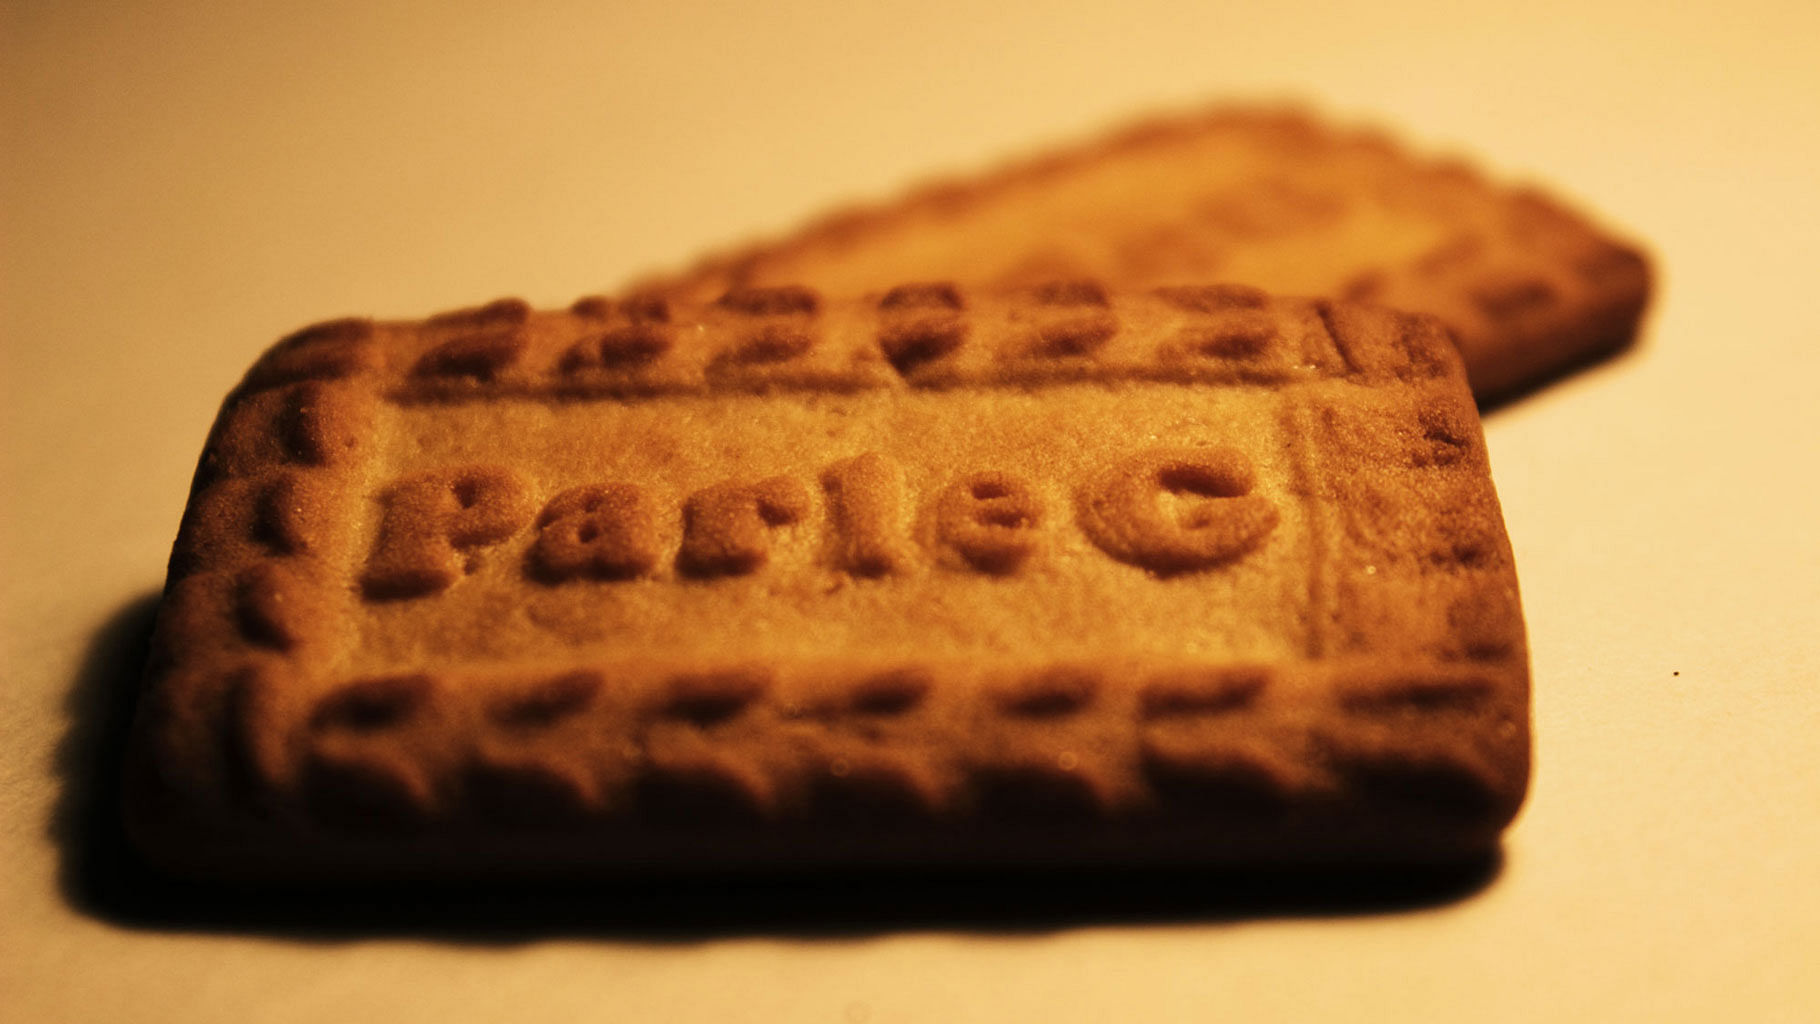 ParleG is the highest selling single brand biscuit. (Photo Courtesy: Flickr/<a href="https://www.flickr.com/photos/63244841@N06/8897775019/">aniketjack</a>)